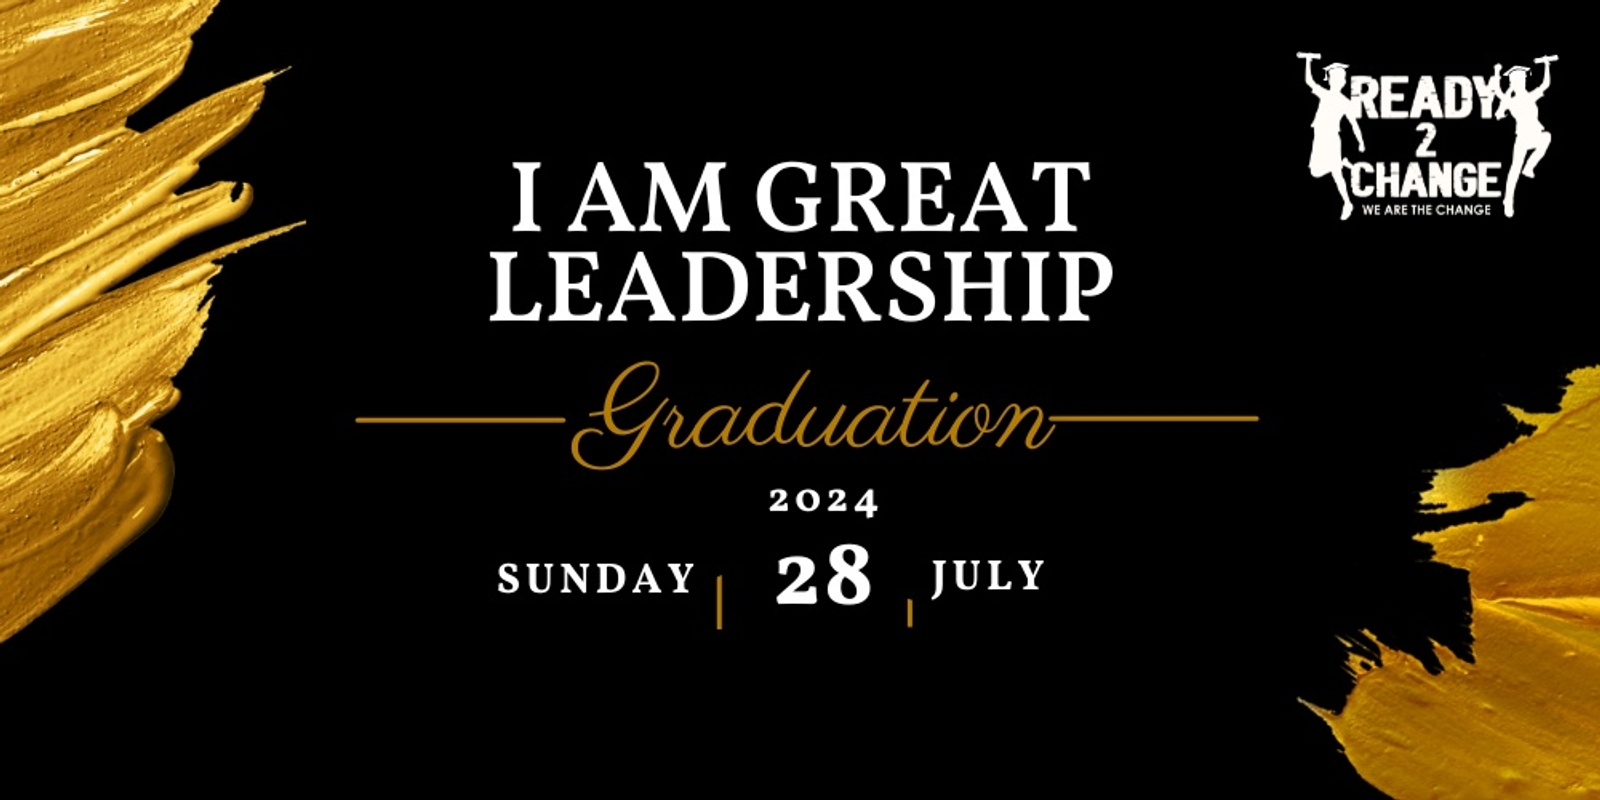 Banner image for Ready 2 Change - I Am Great Leadership Graduation